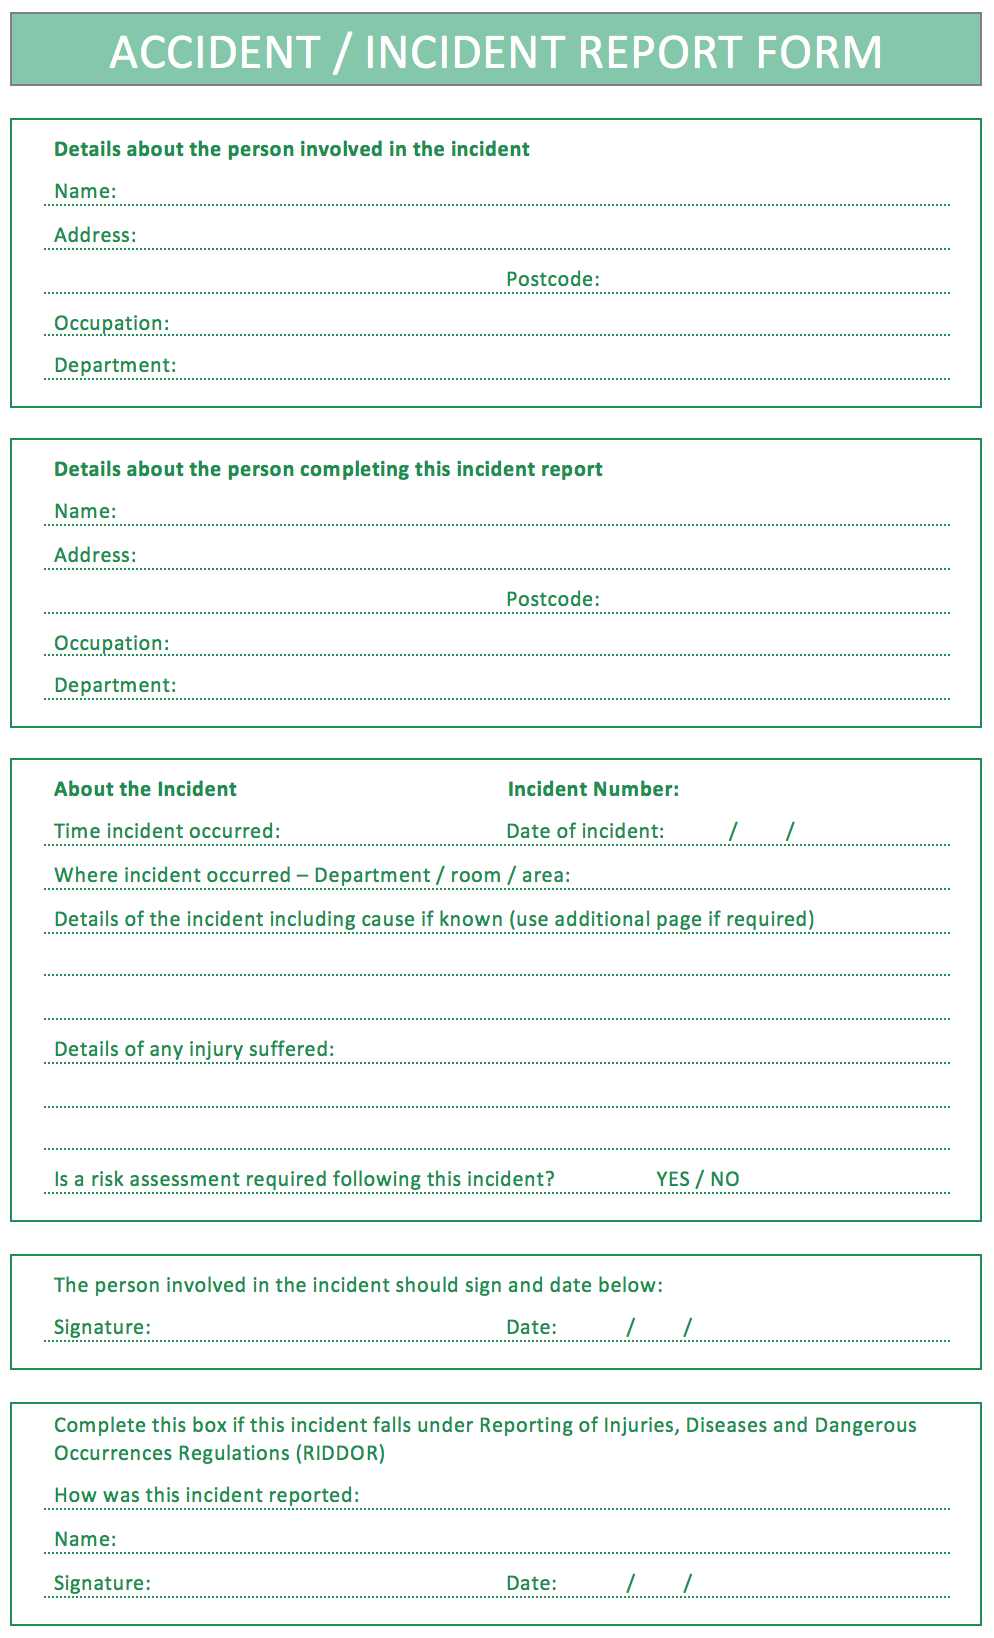 What Is Riddor – A Short Introduction | Intrafocus Within Accident Report Form Template Uk